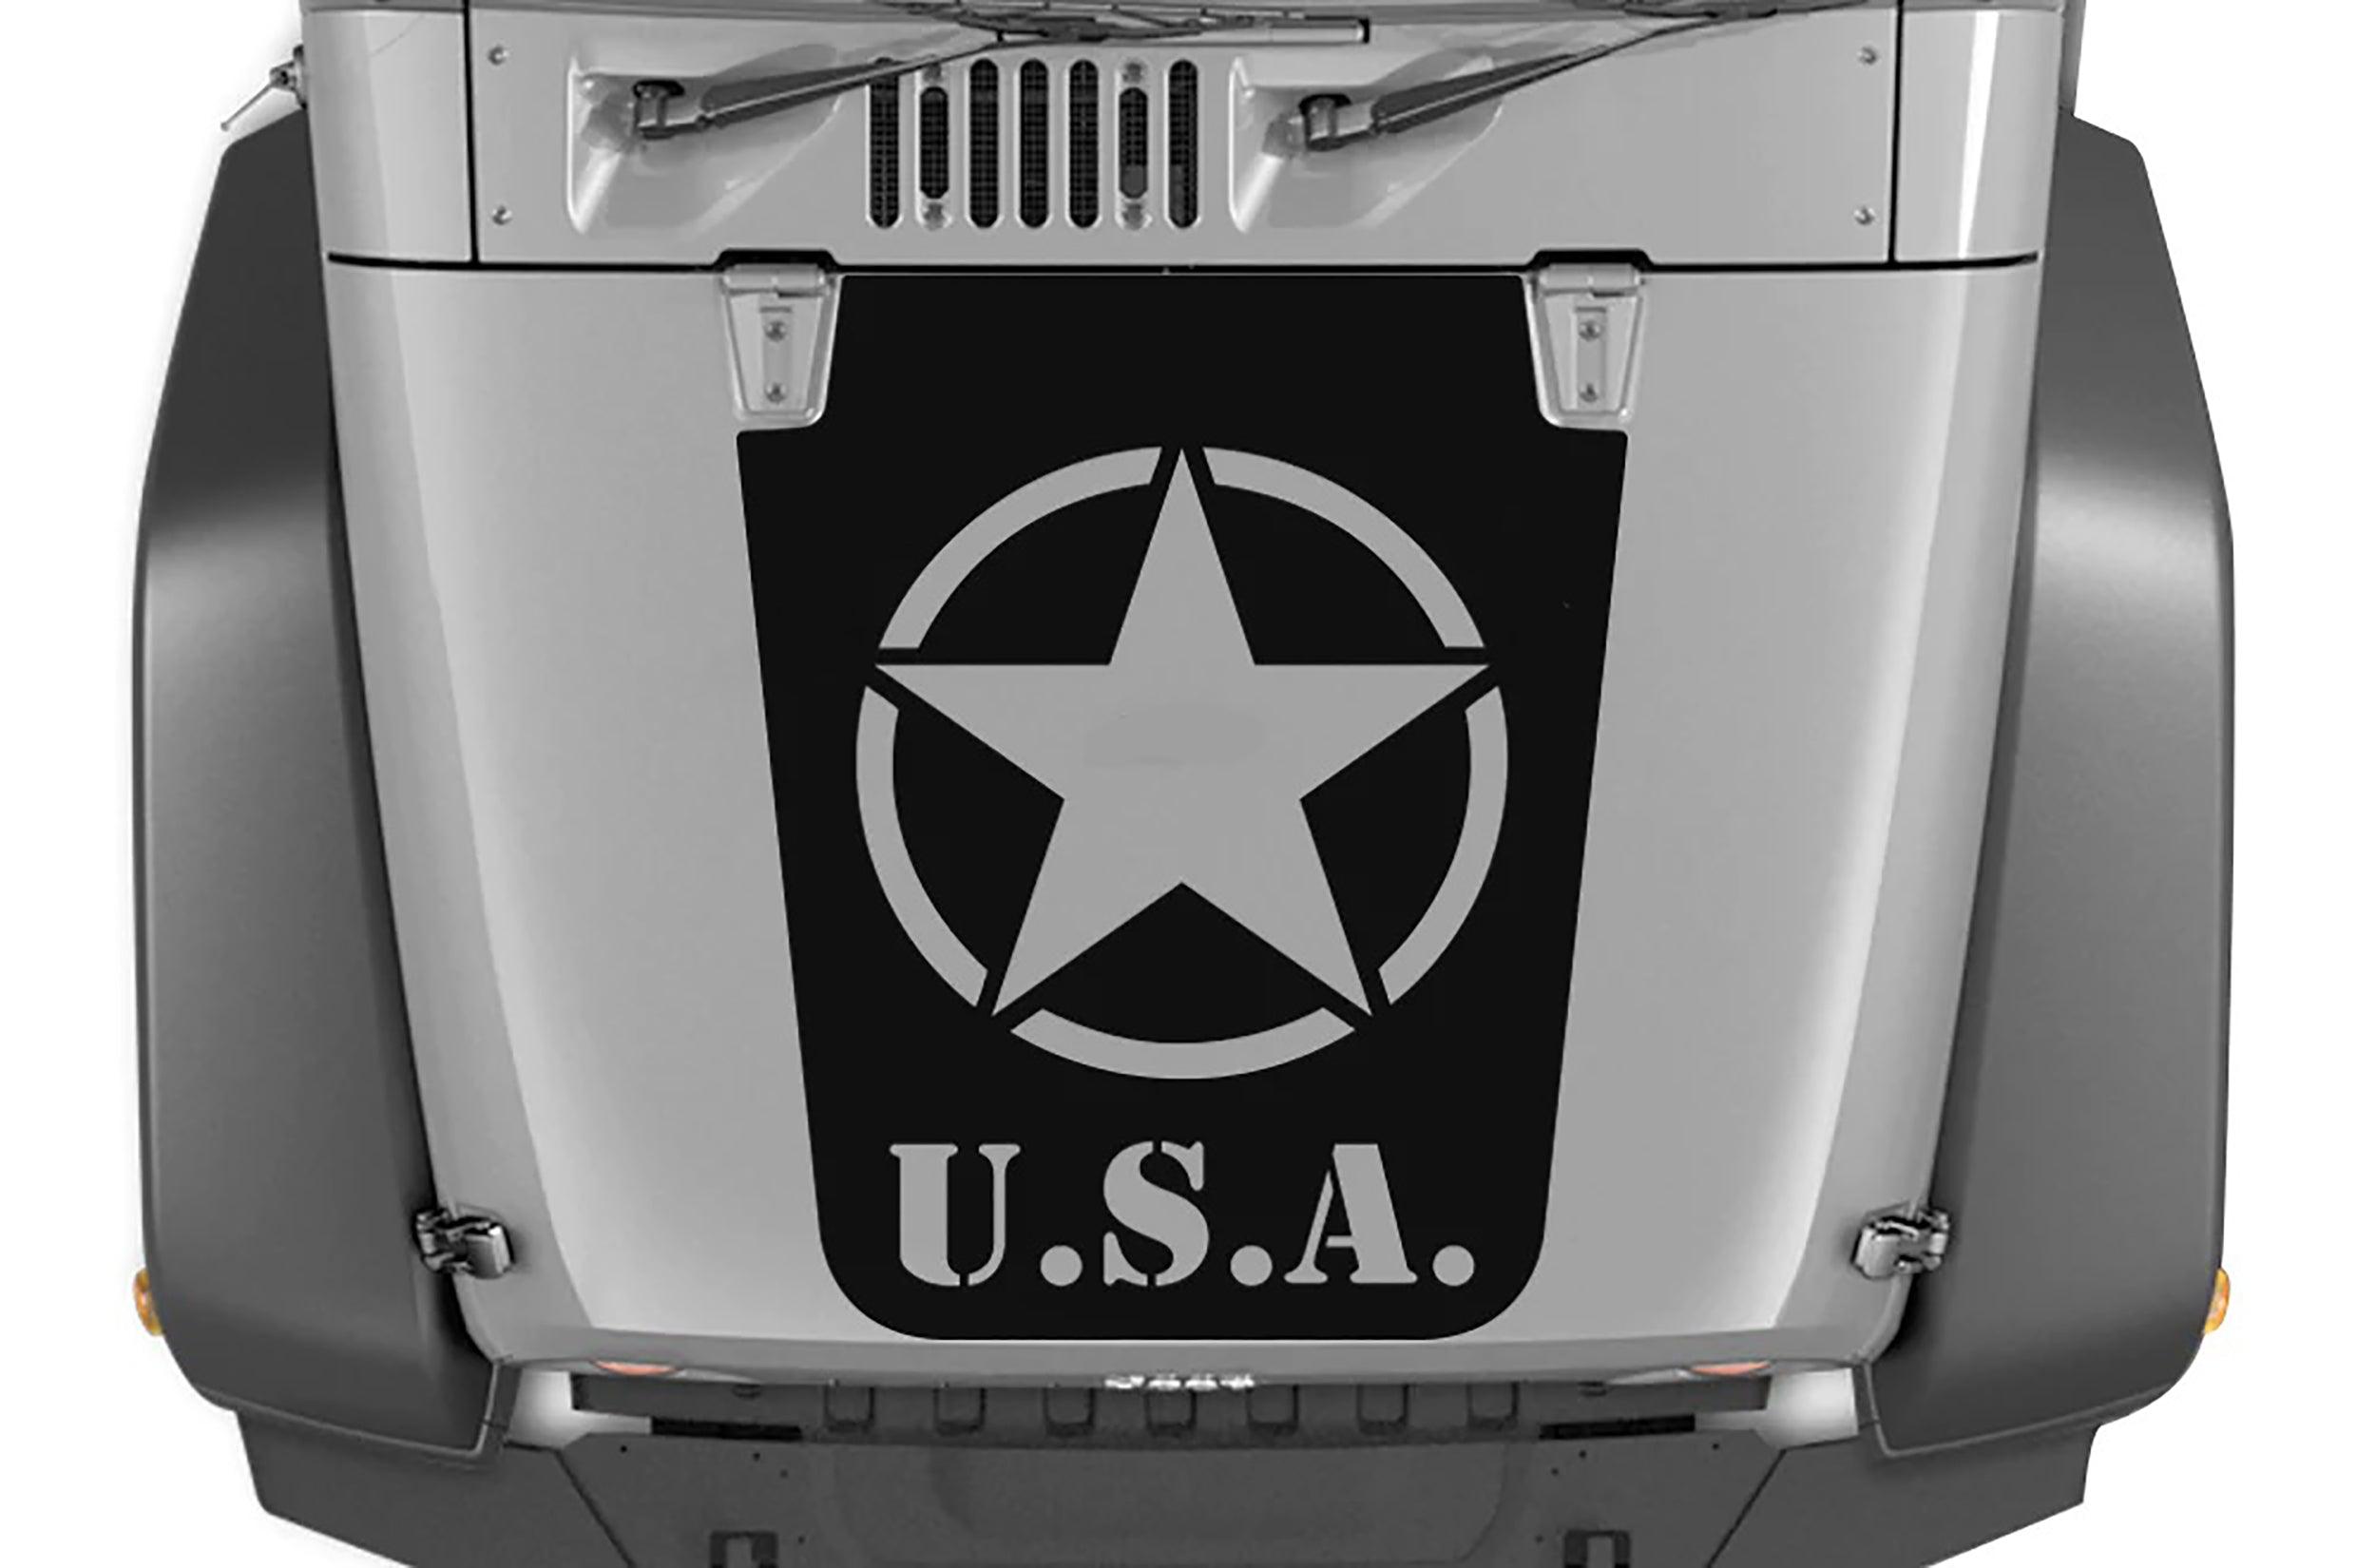 Jeep Wrangler JK (2007-2018) Custom Decals, Graphics and Stickers - USA Star Hood Decal - Jkprostickers